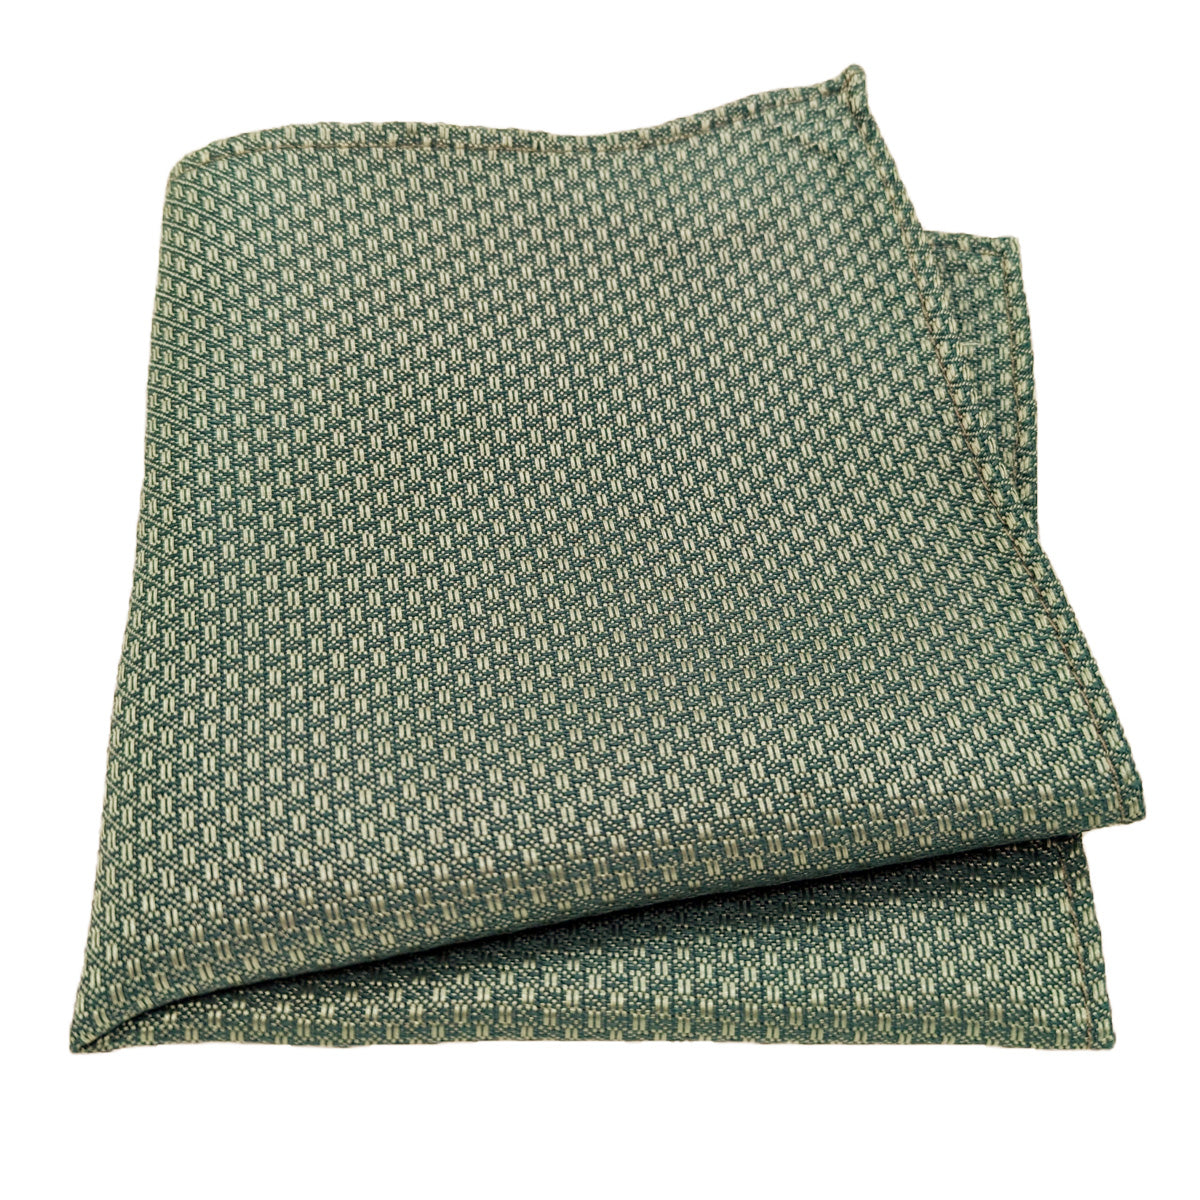 Spruce Woven Pocket Square